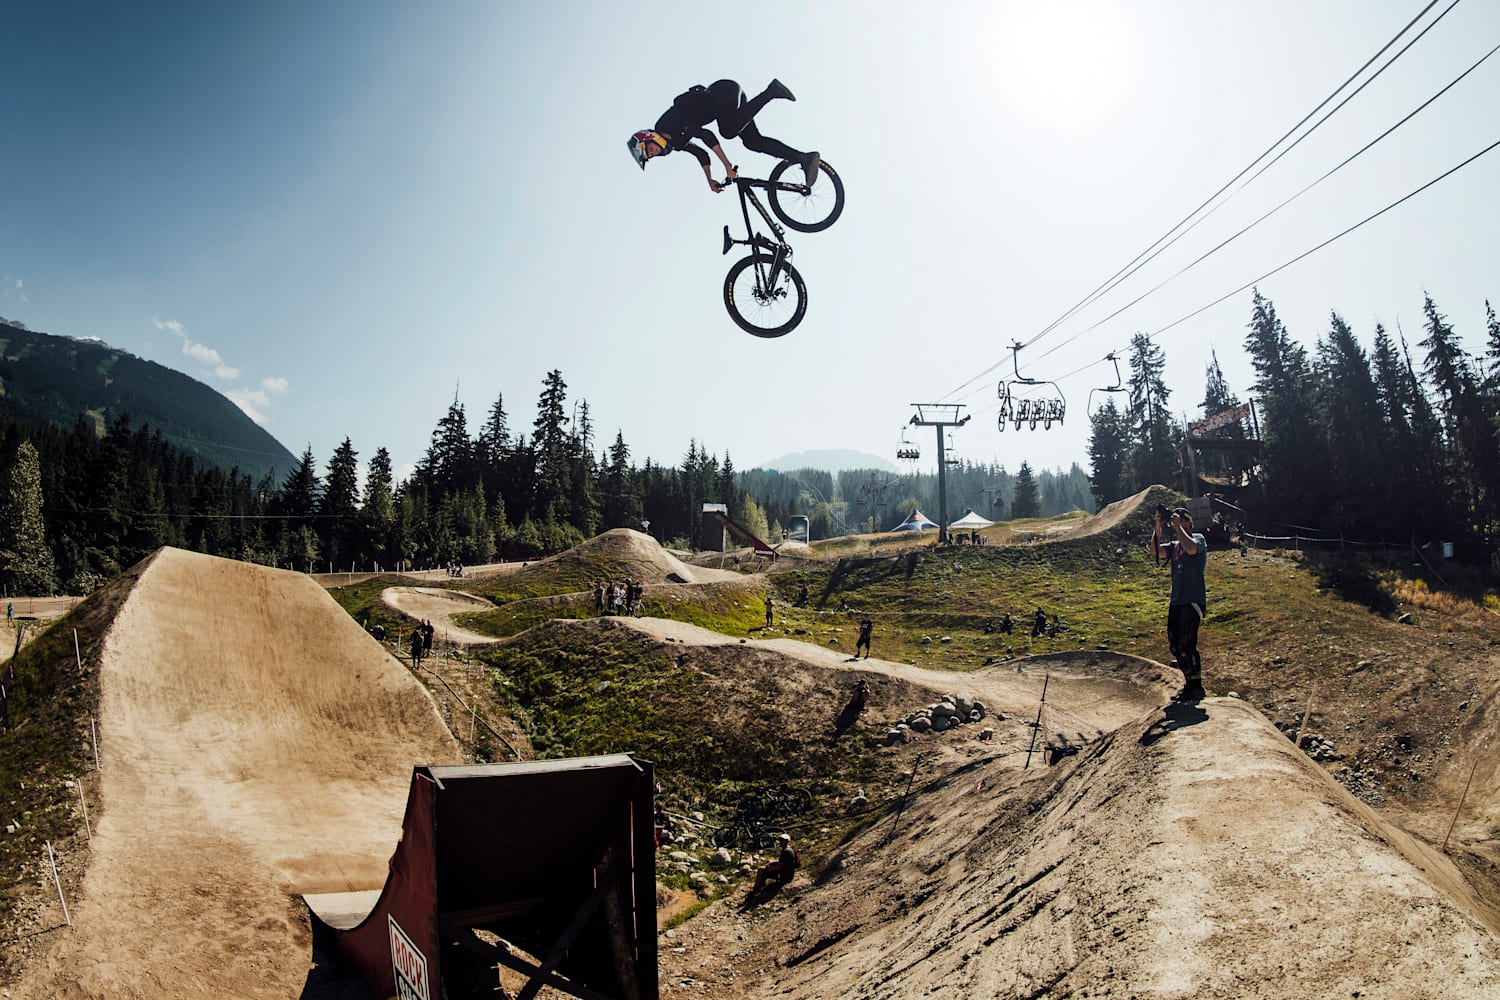 Relive some great moments of slopestyle action in our edit of highlights fr...